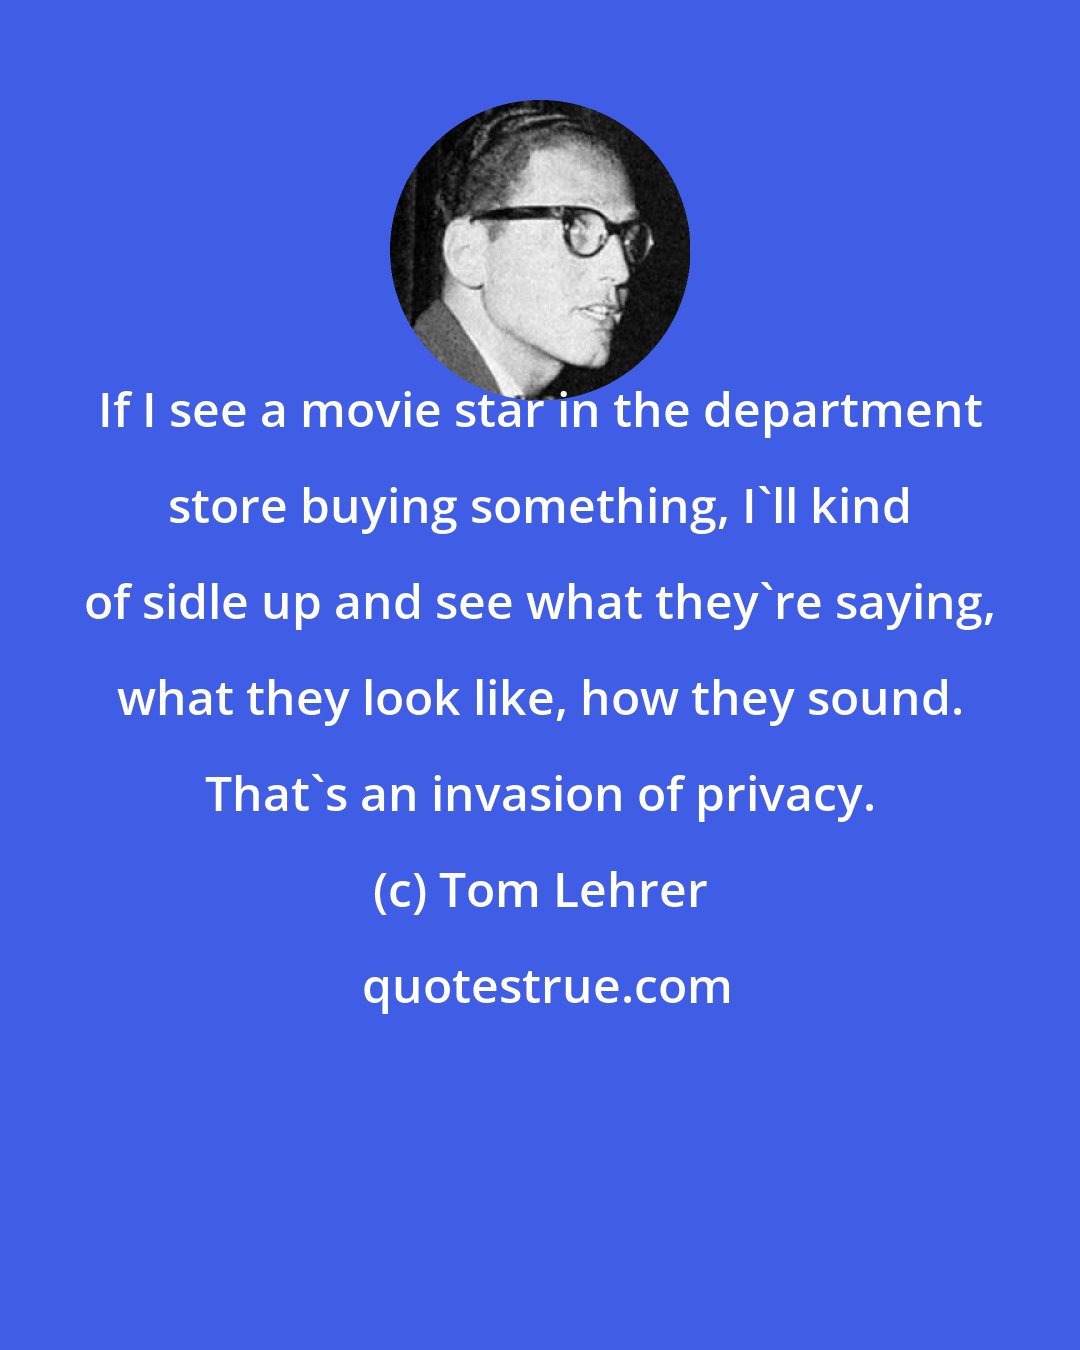 Tom Lehrer: If I see a movie star in the department store buying something, I'll kind of sidle up and see what they're saying, what they look like, how they sound. That's an invasion of privacy.